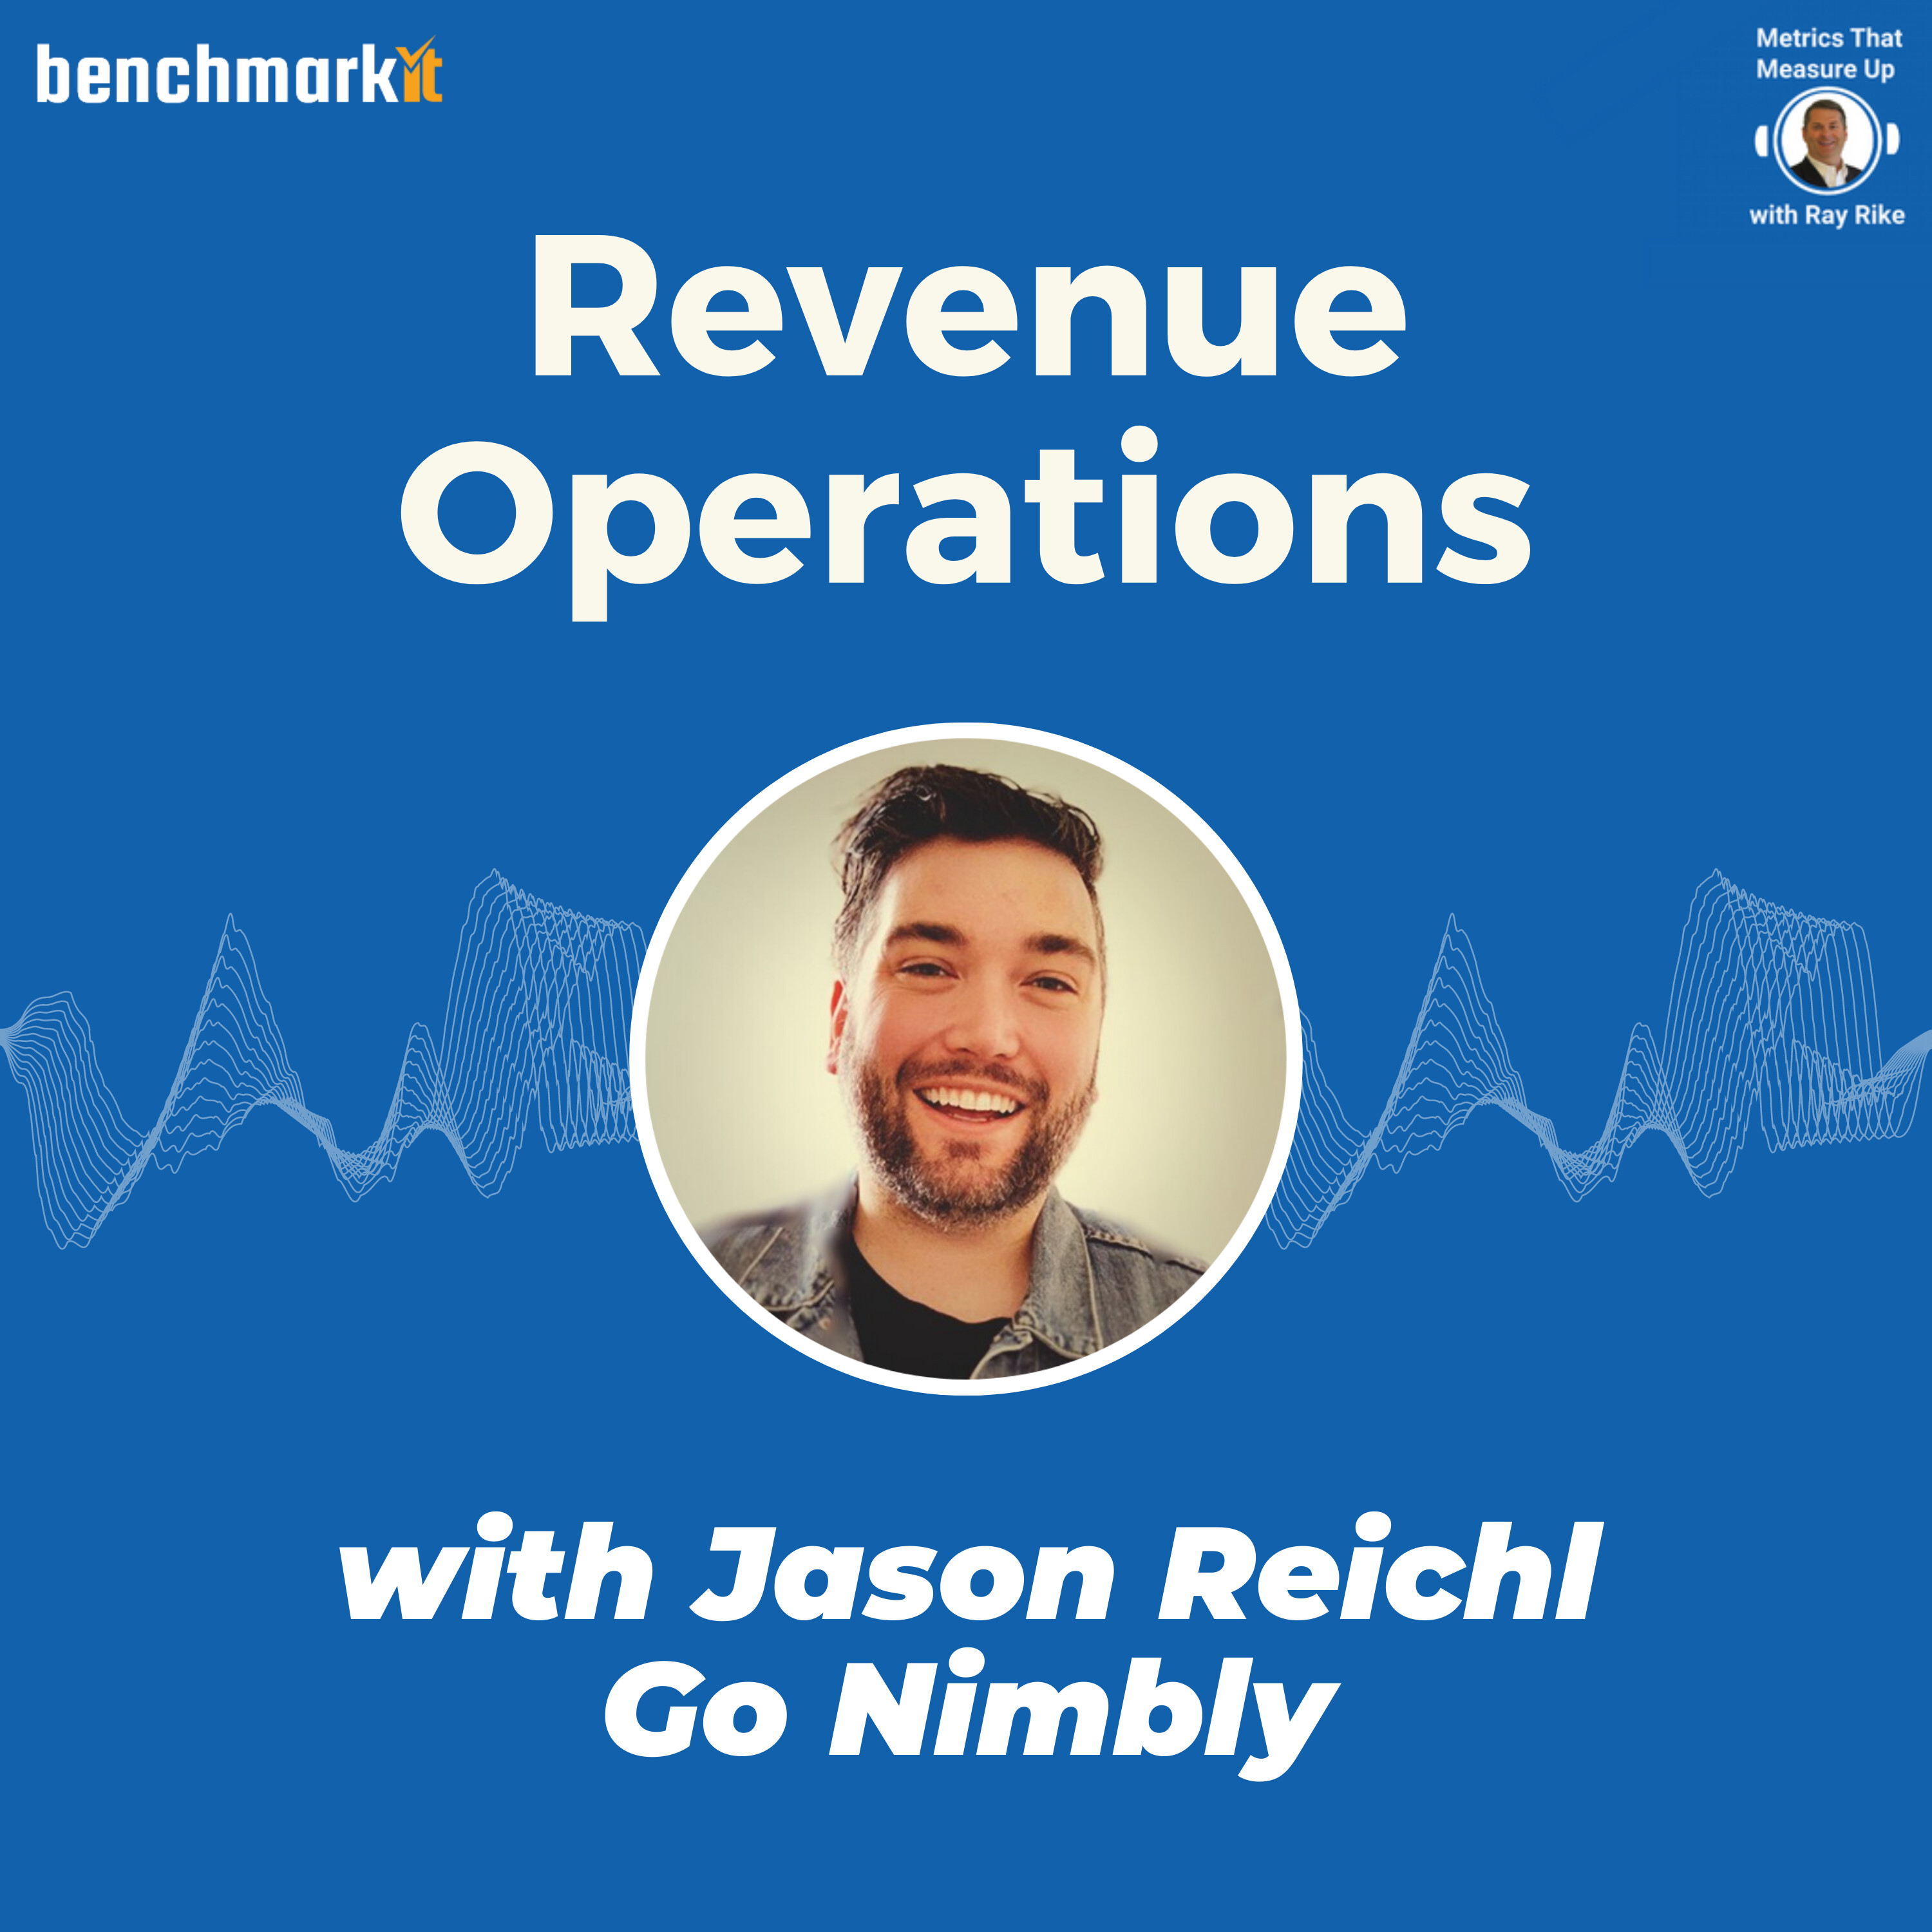 Revenue Operations - What, Why and How to Measure Business Impact - Jason Reichl, Go Nimbly